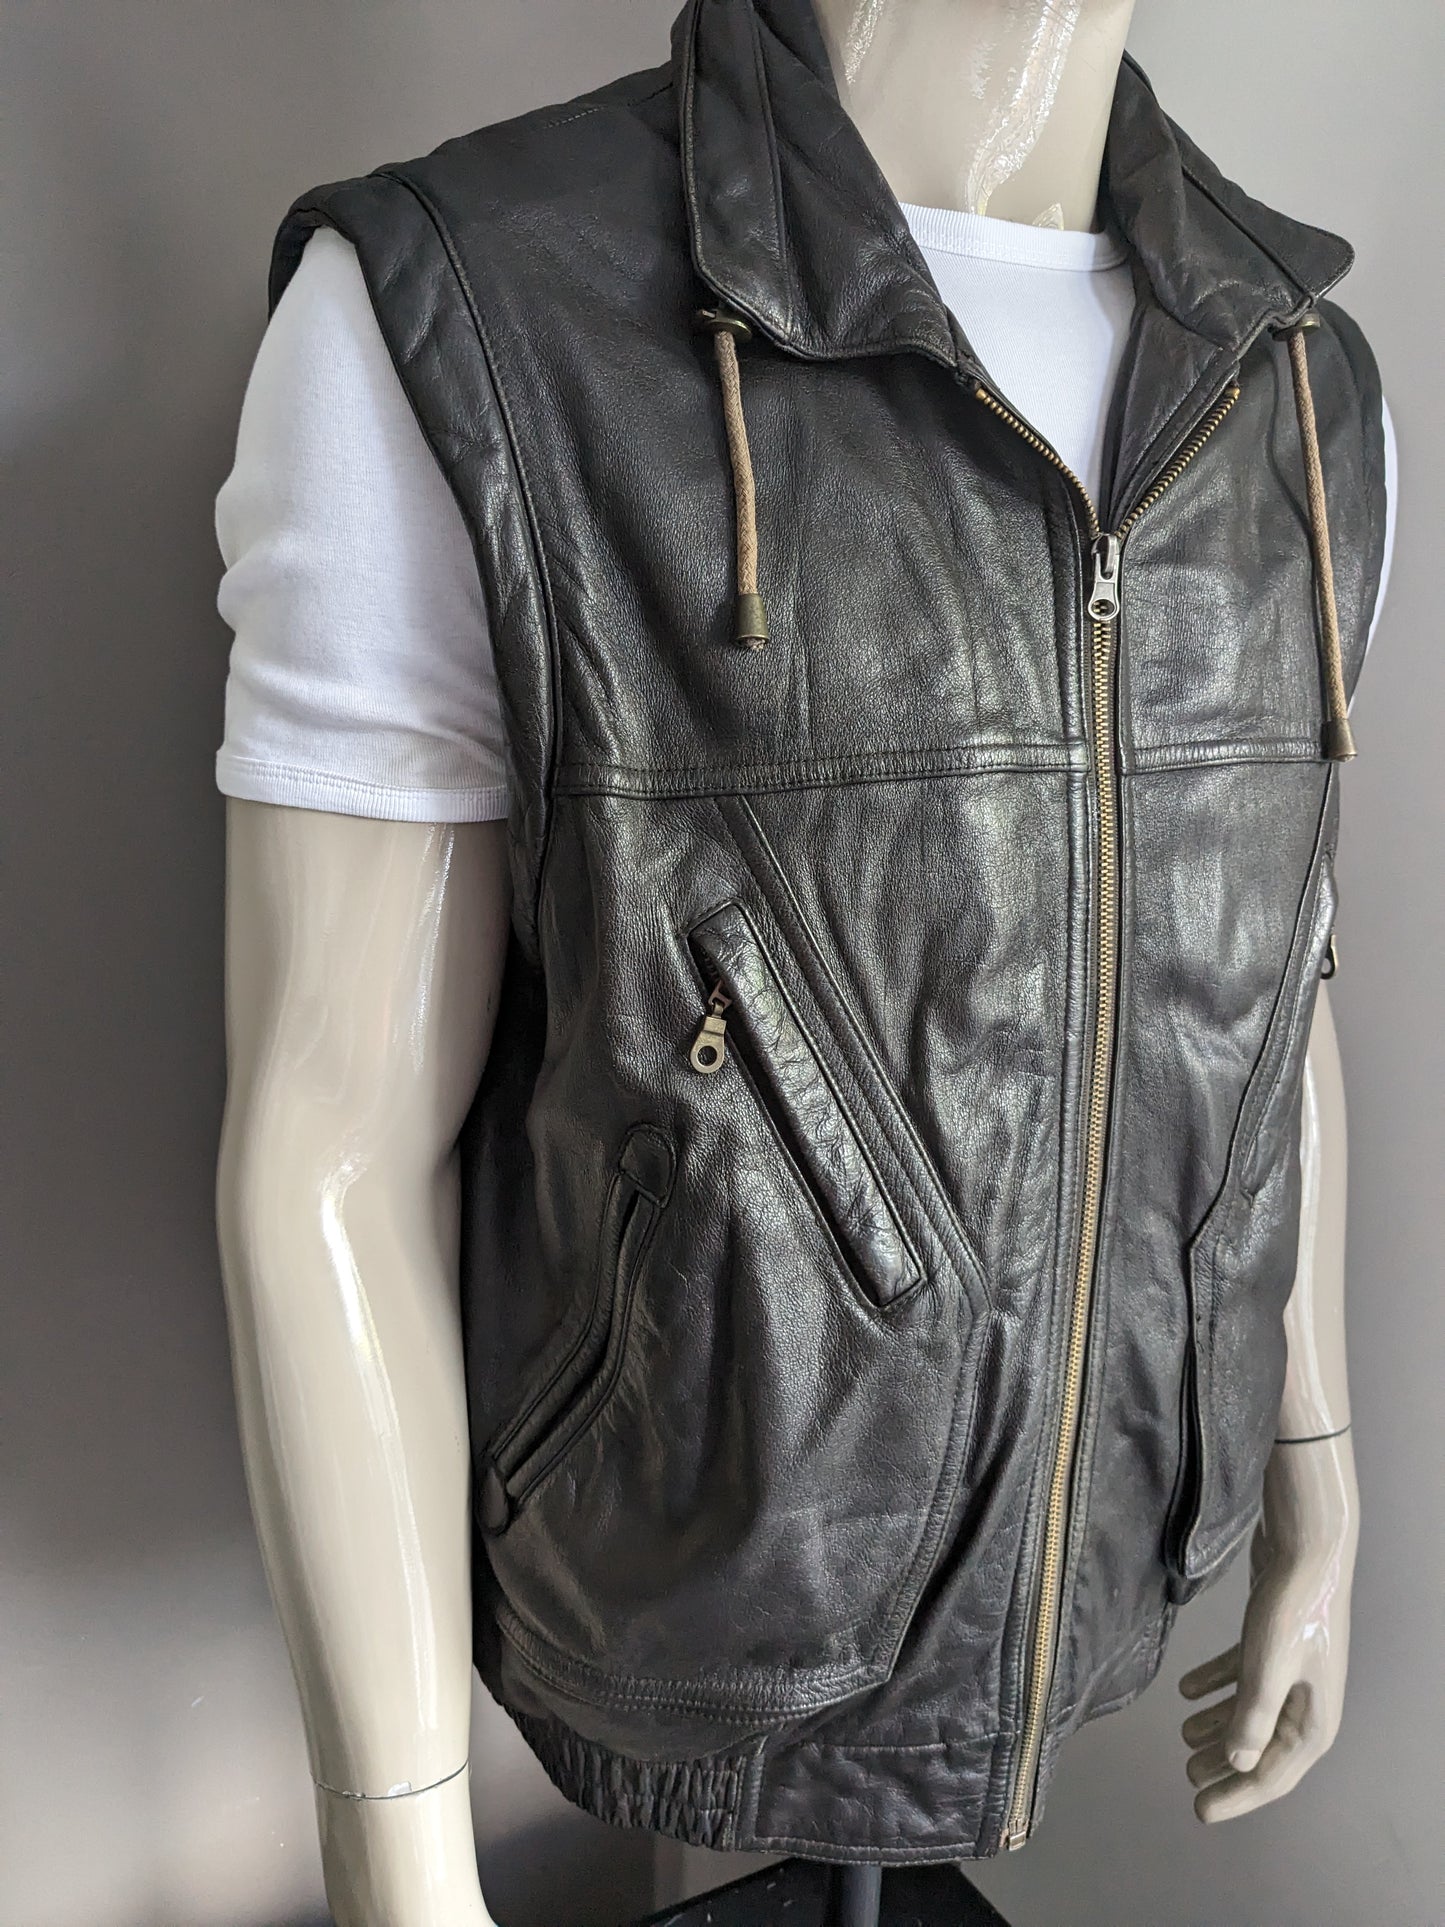 Vintage Prince Leather Body Warmer. Black colored. Size 52 / L. with 2 inner pockets.